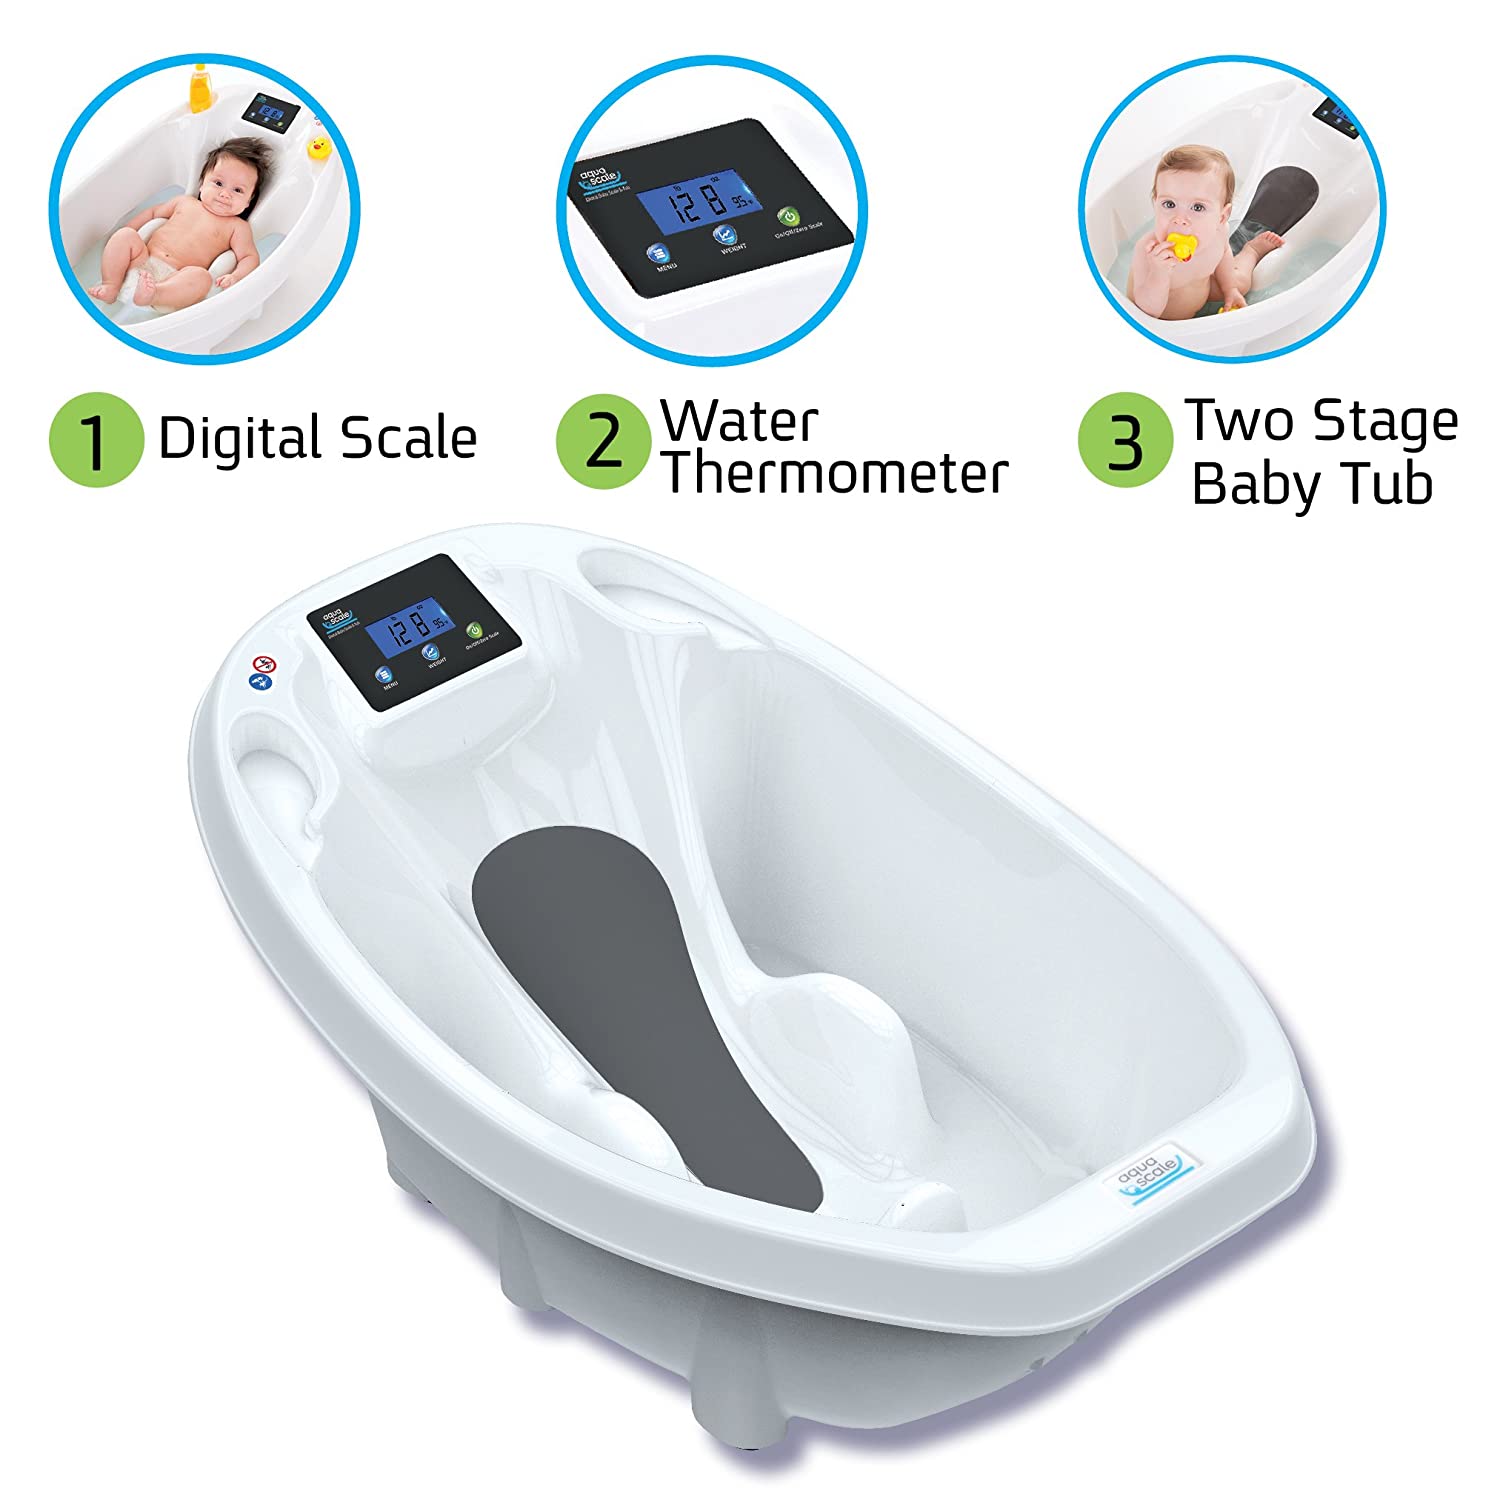 AquaScale 3-in-1 Digital Scale, Water Thermometer and Infant Tub - image 5 of 5